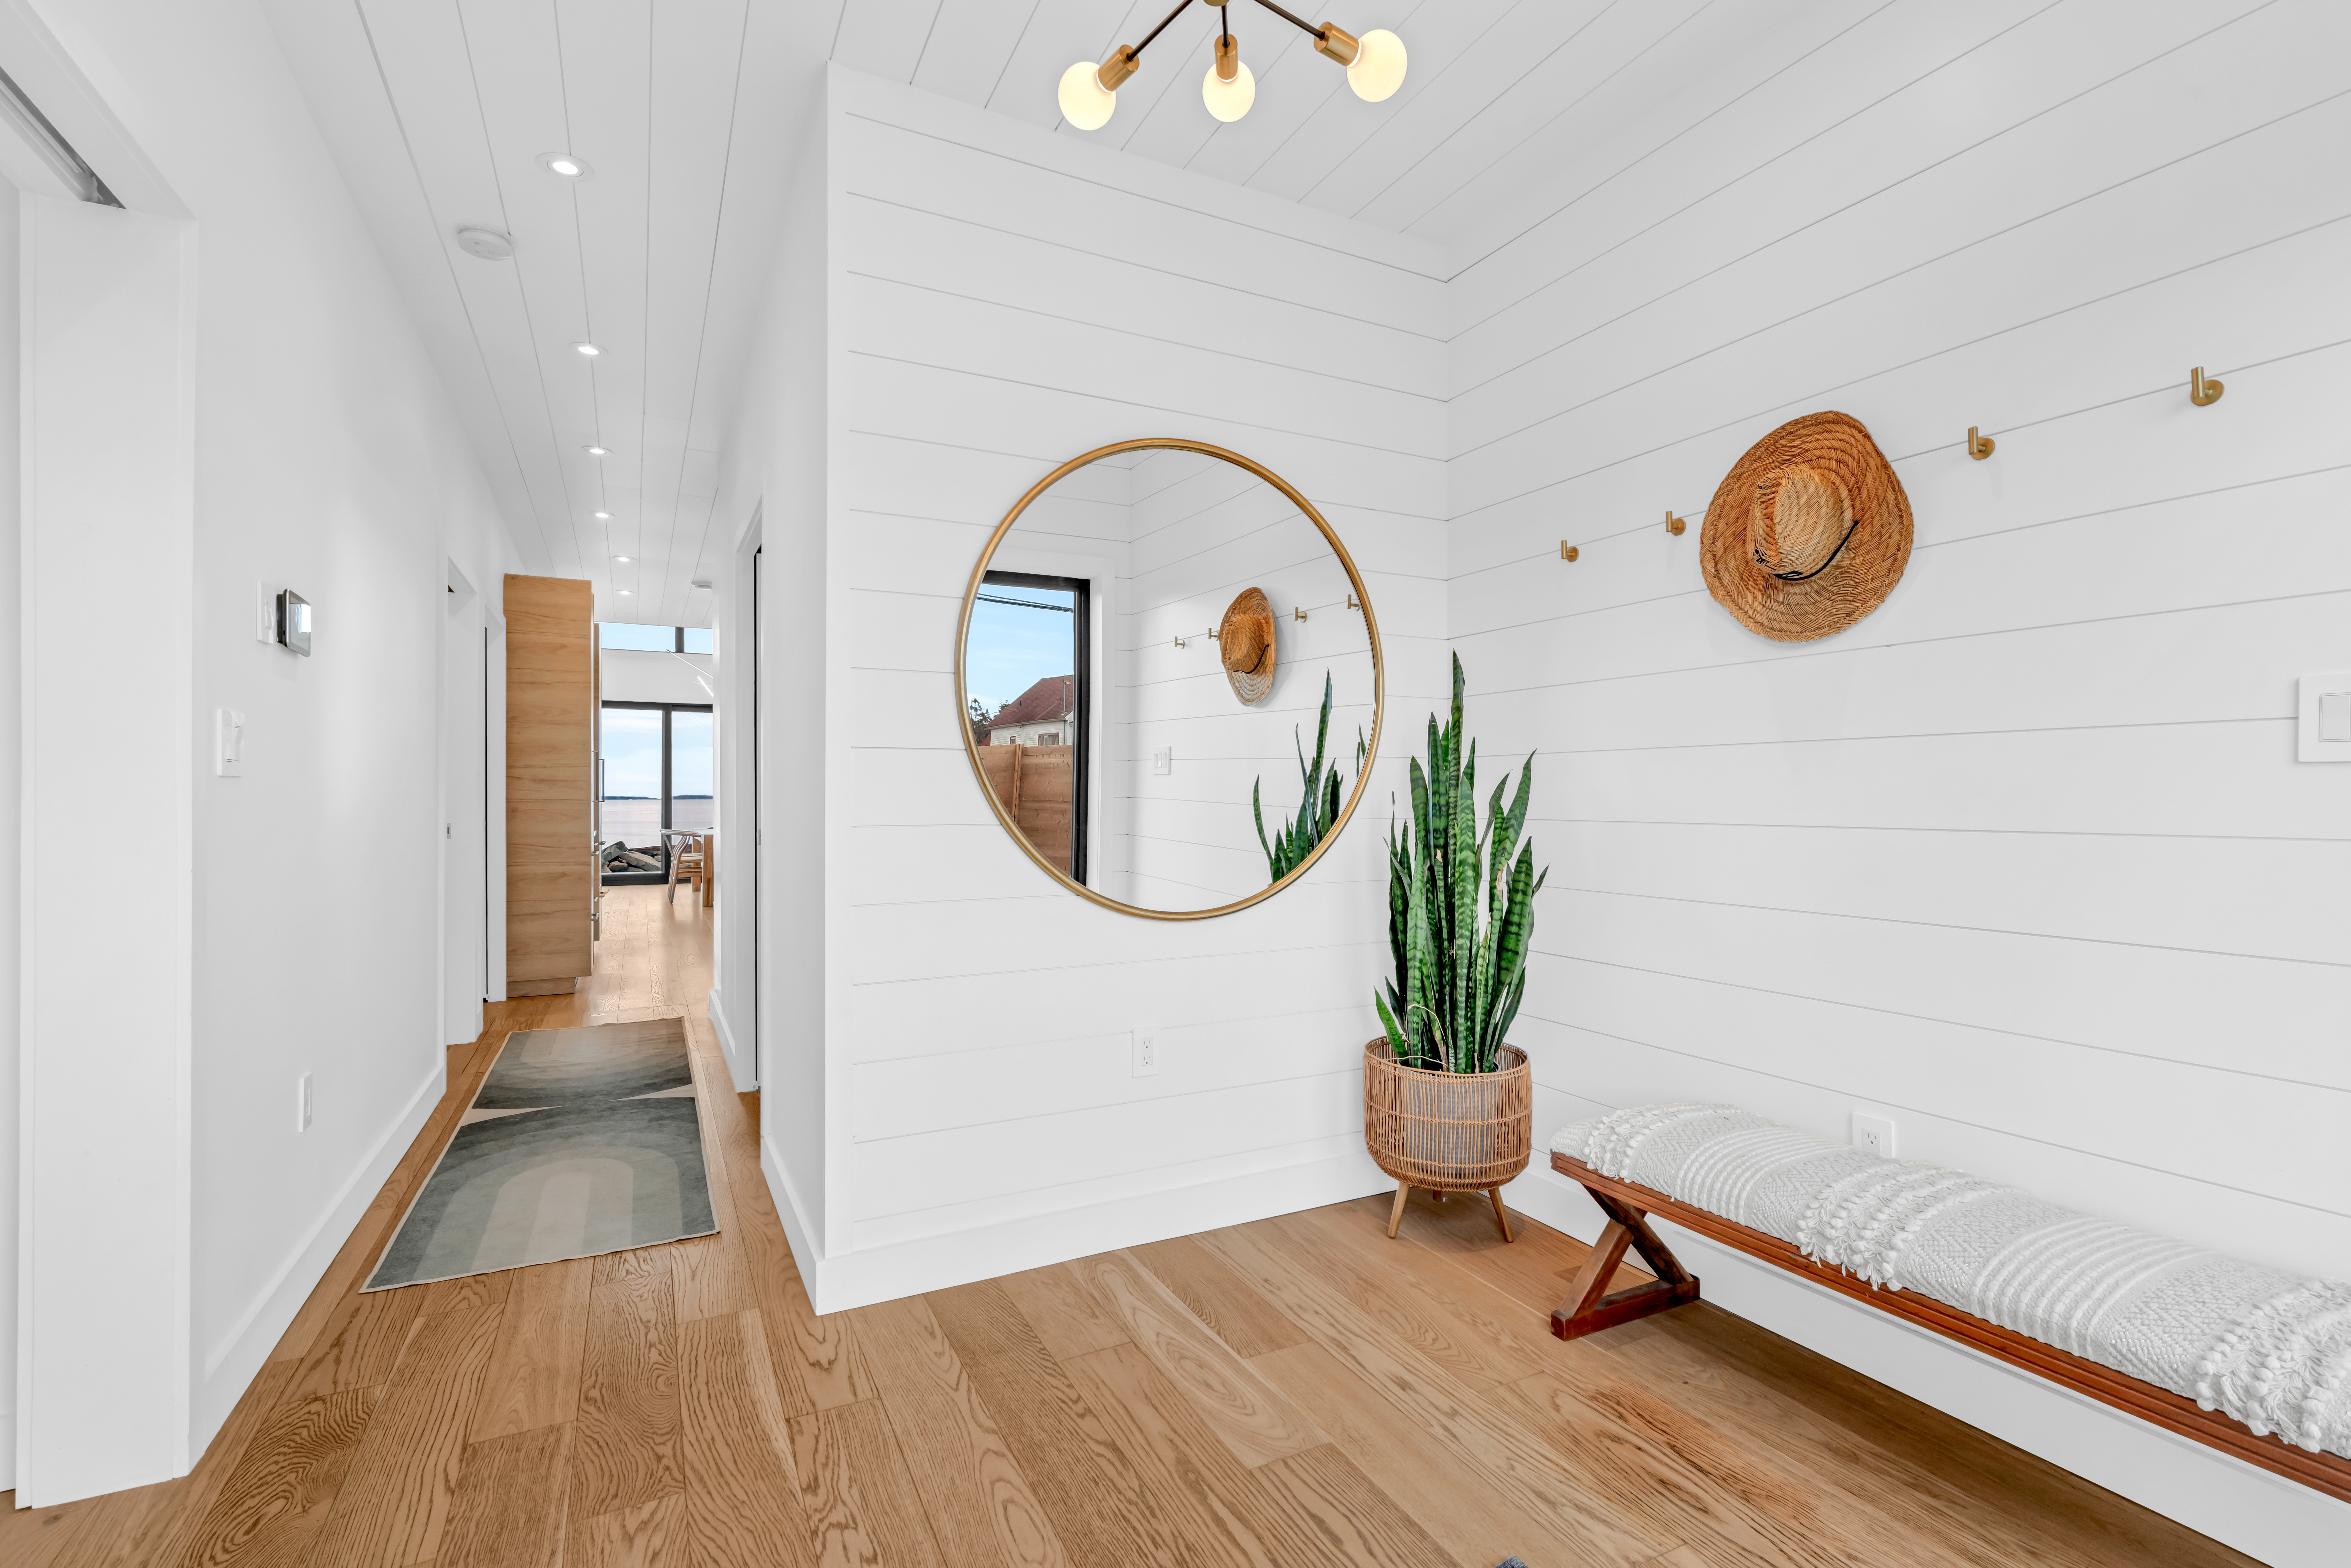 A bright front entryway with white-painted shiplap walls and ceiling. A narrow hallway leads into the home beyond.